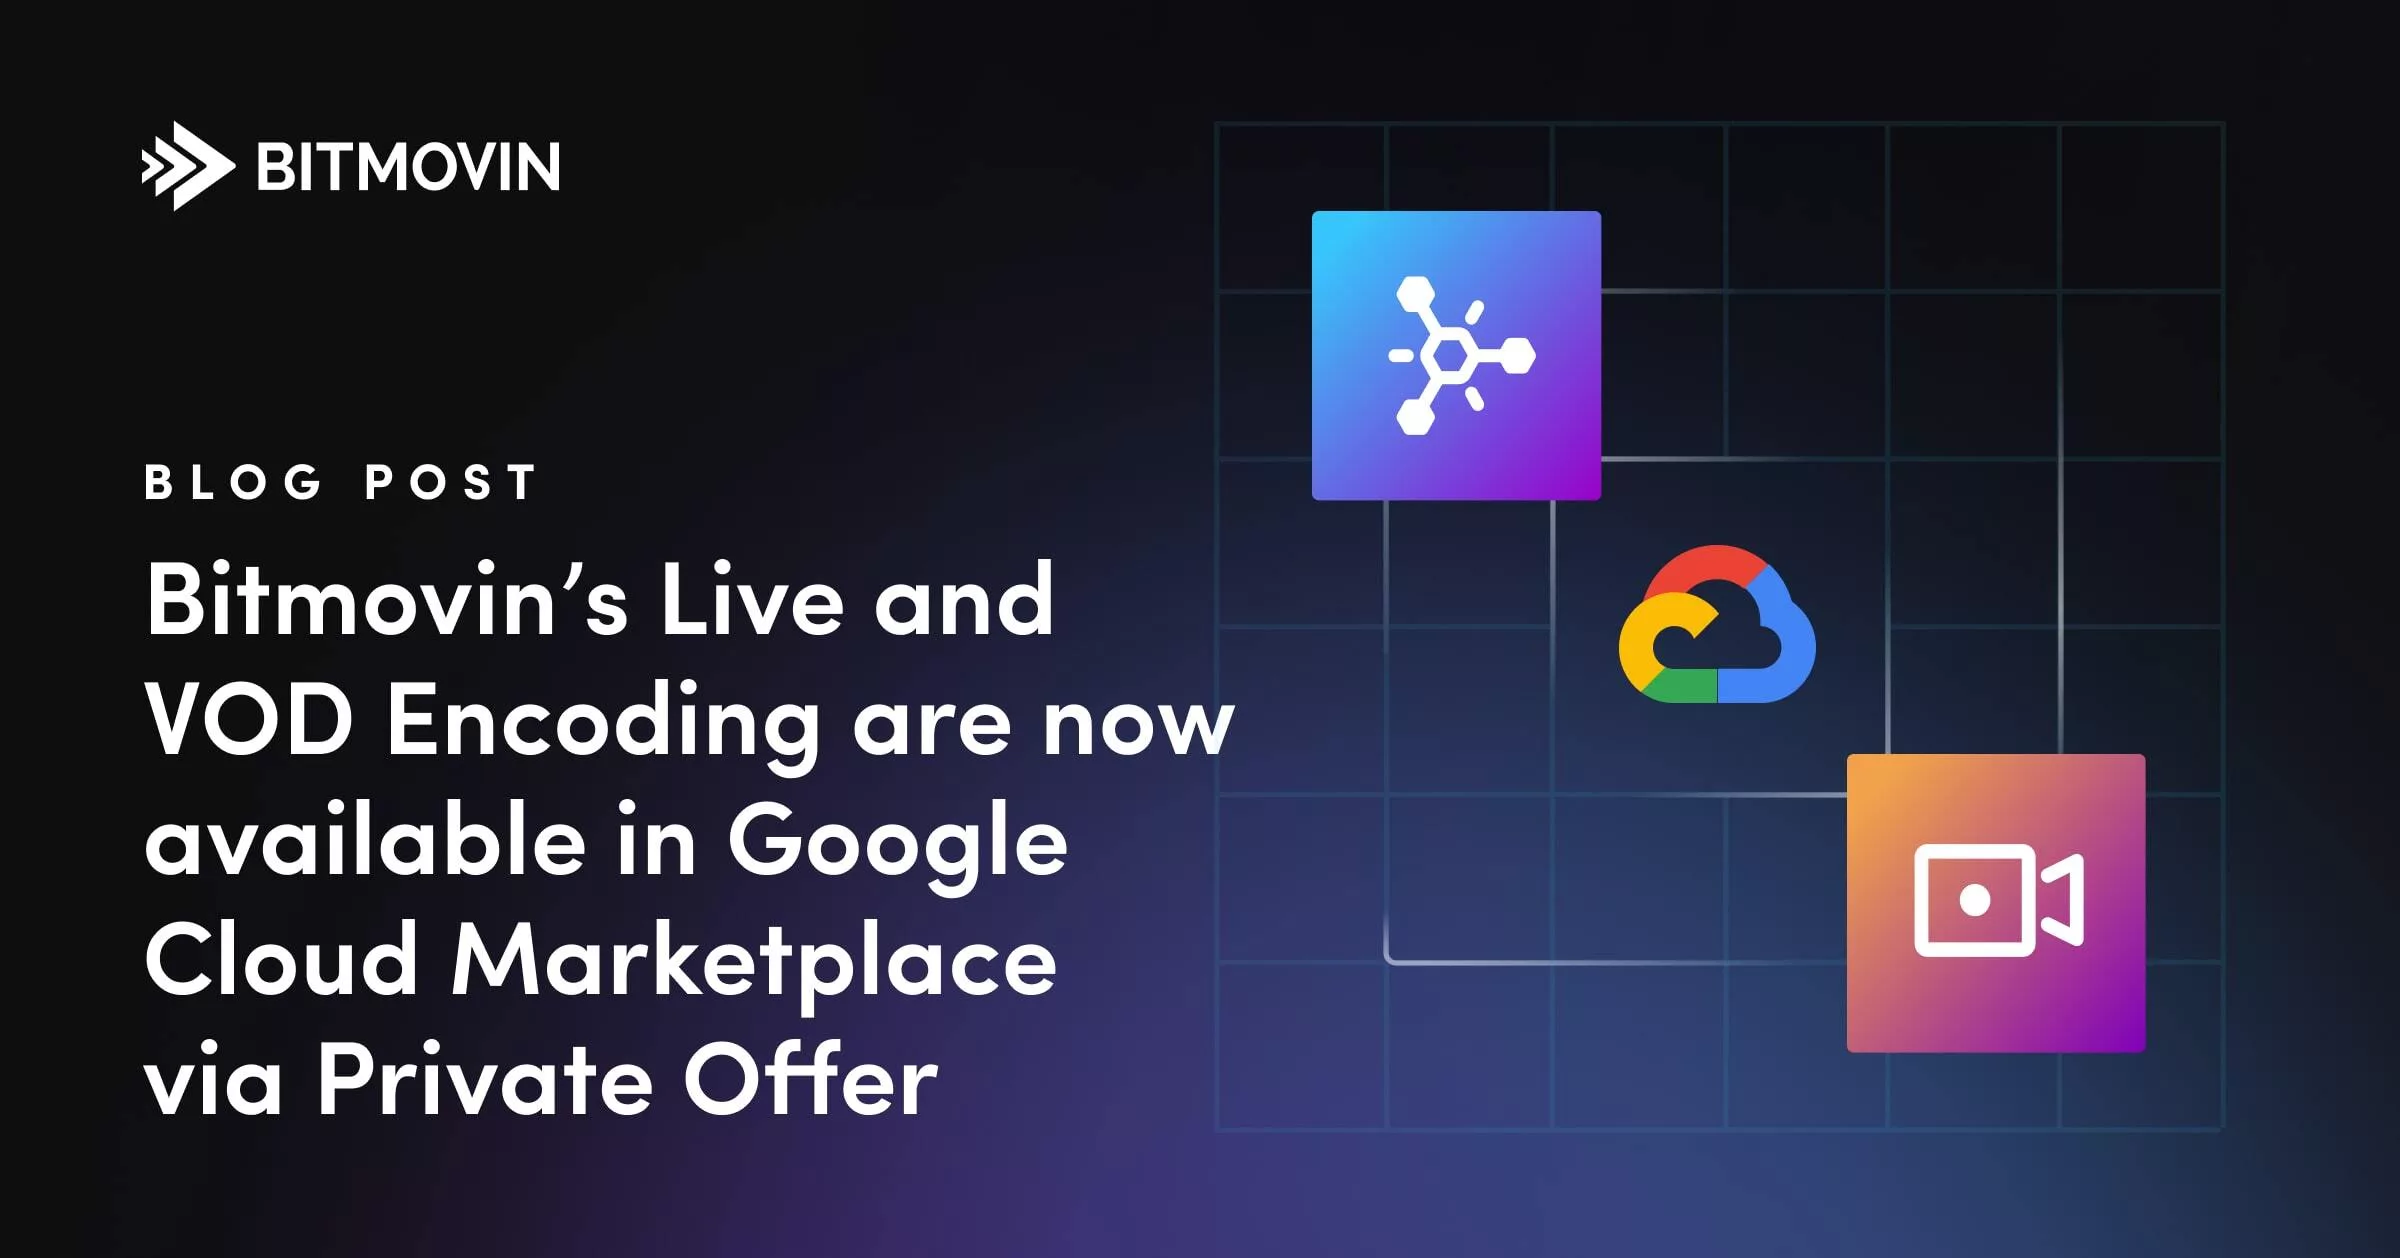 Bitmovins Live and VOD Encoding in Google Cloud Marketplace